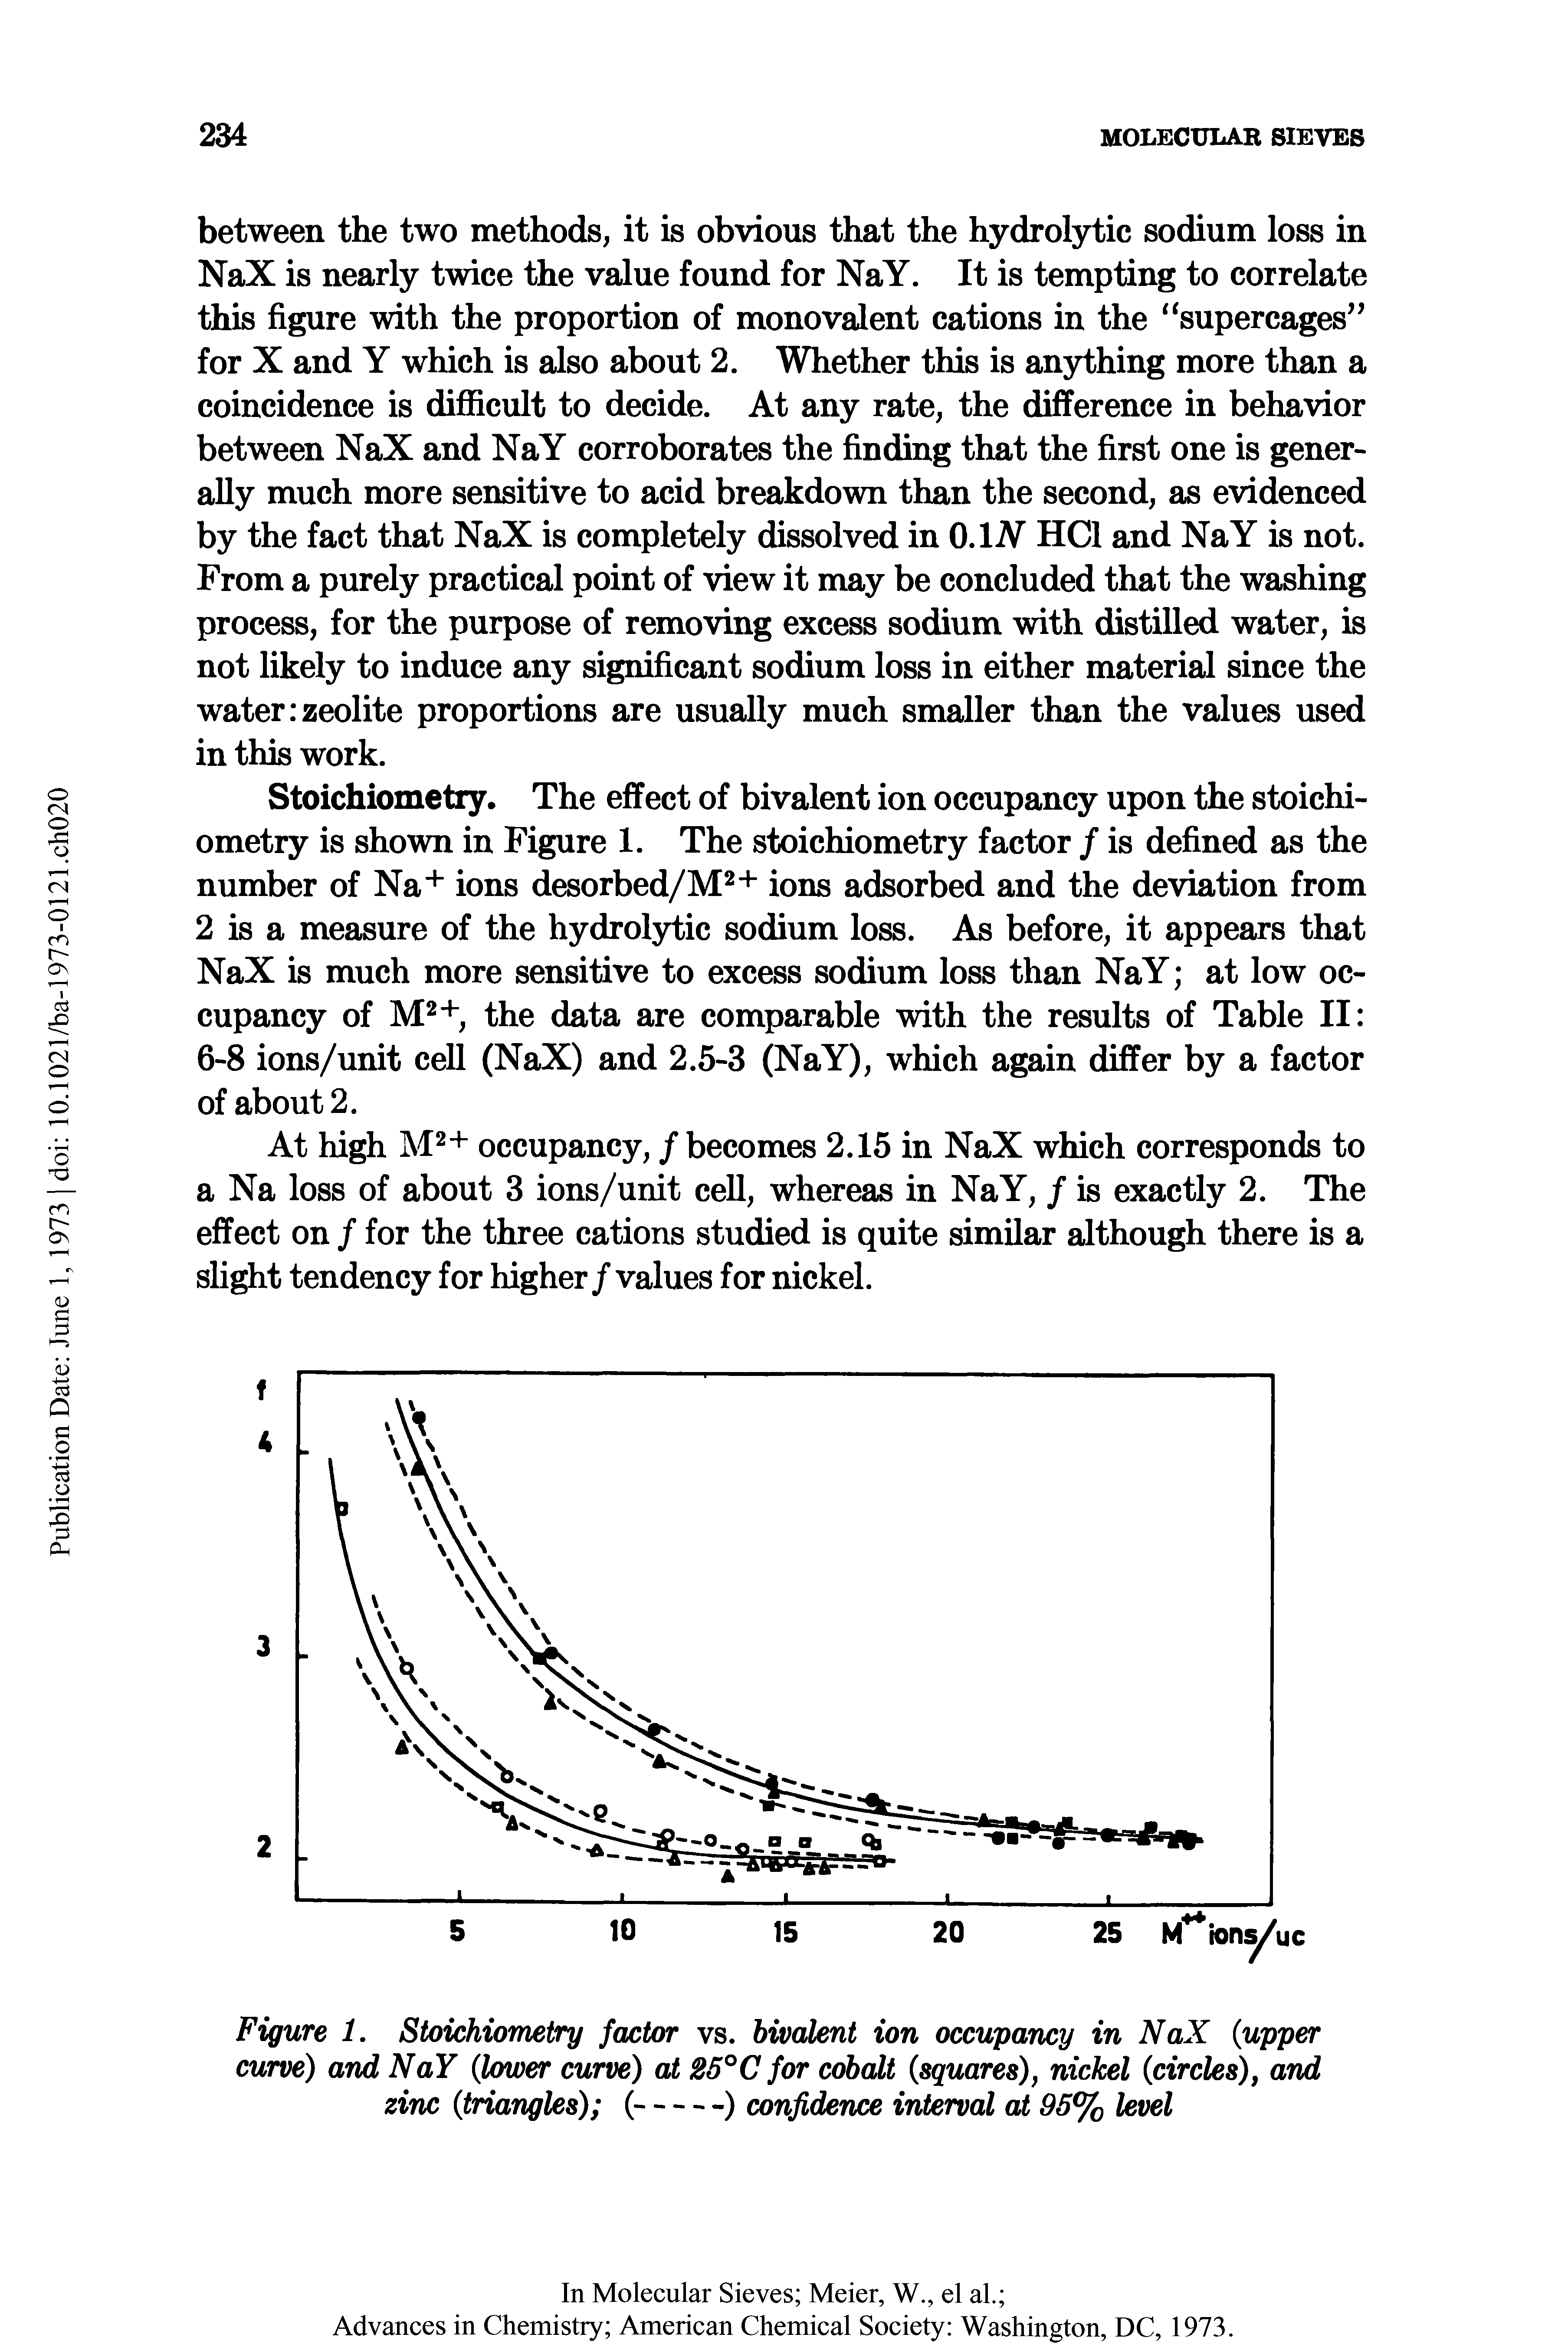 Figure 1. Stoichiometry factor vs. bivalent ion occupancy in NaX (upper curve) and NaY (lower curve) at 25°C for cobalt (squares), nickel (circles), and zinc (triangles) (---------------) confidence interval at 95% level...